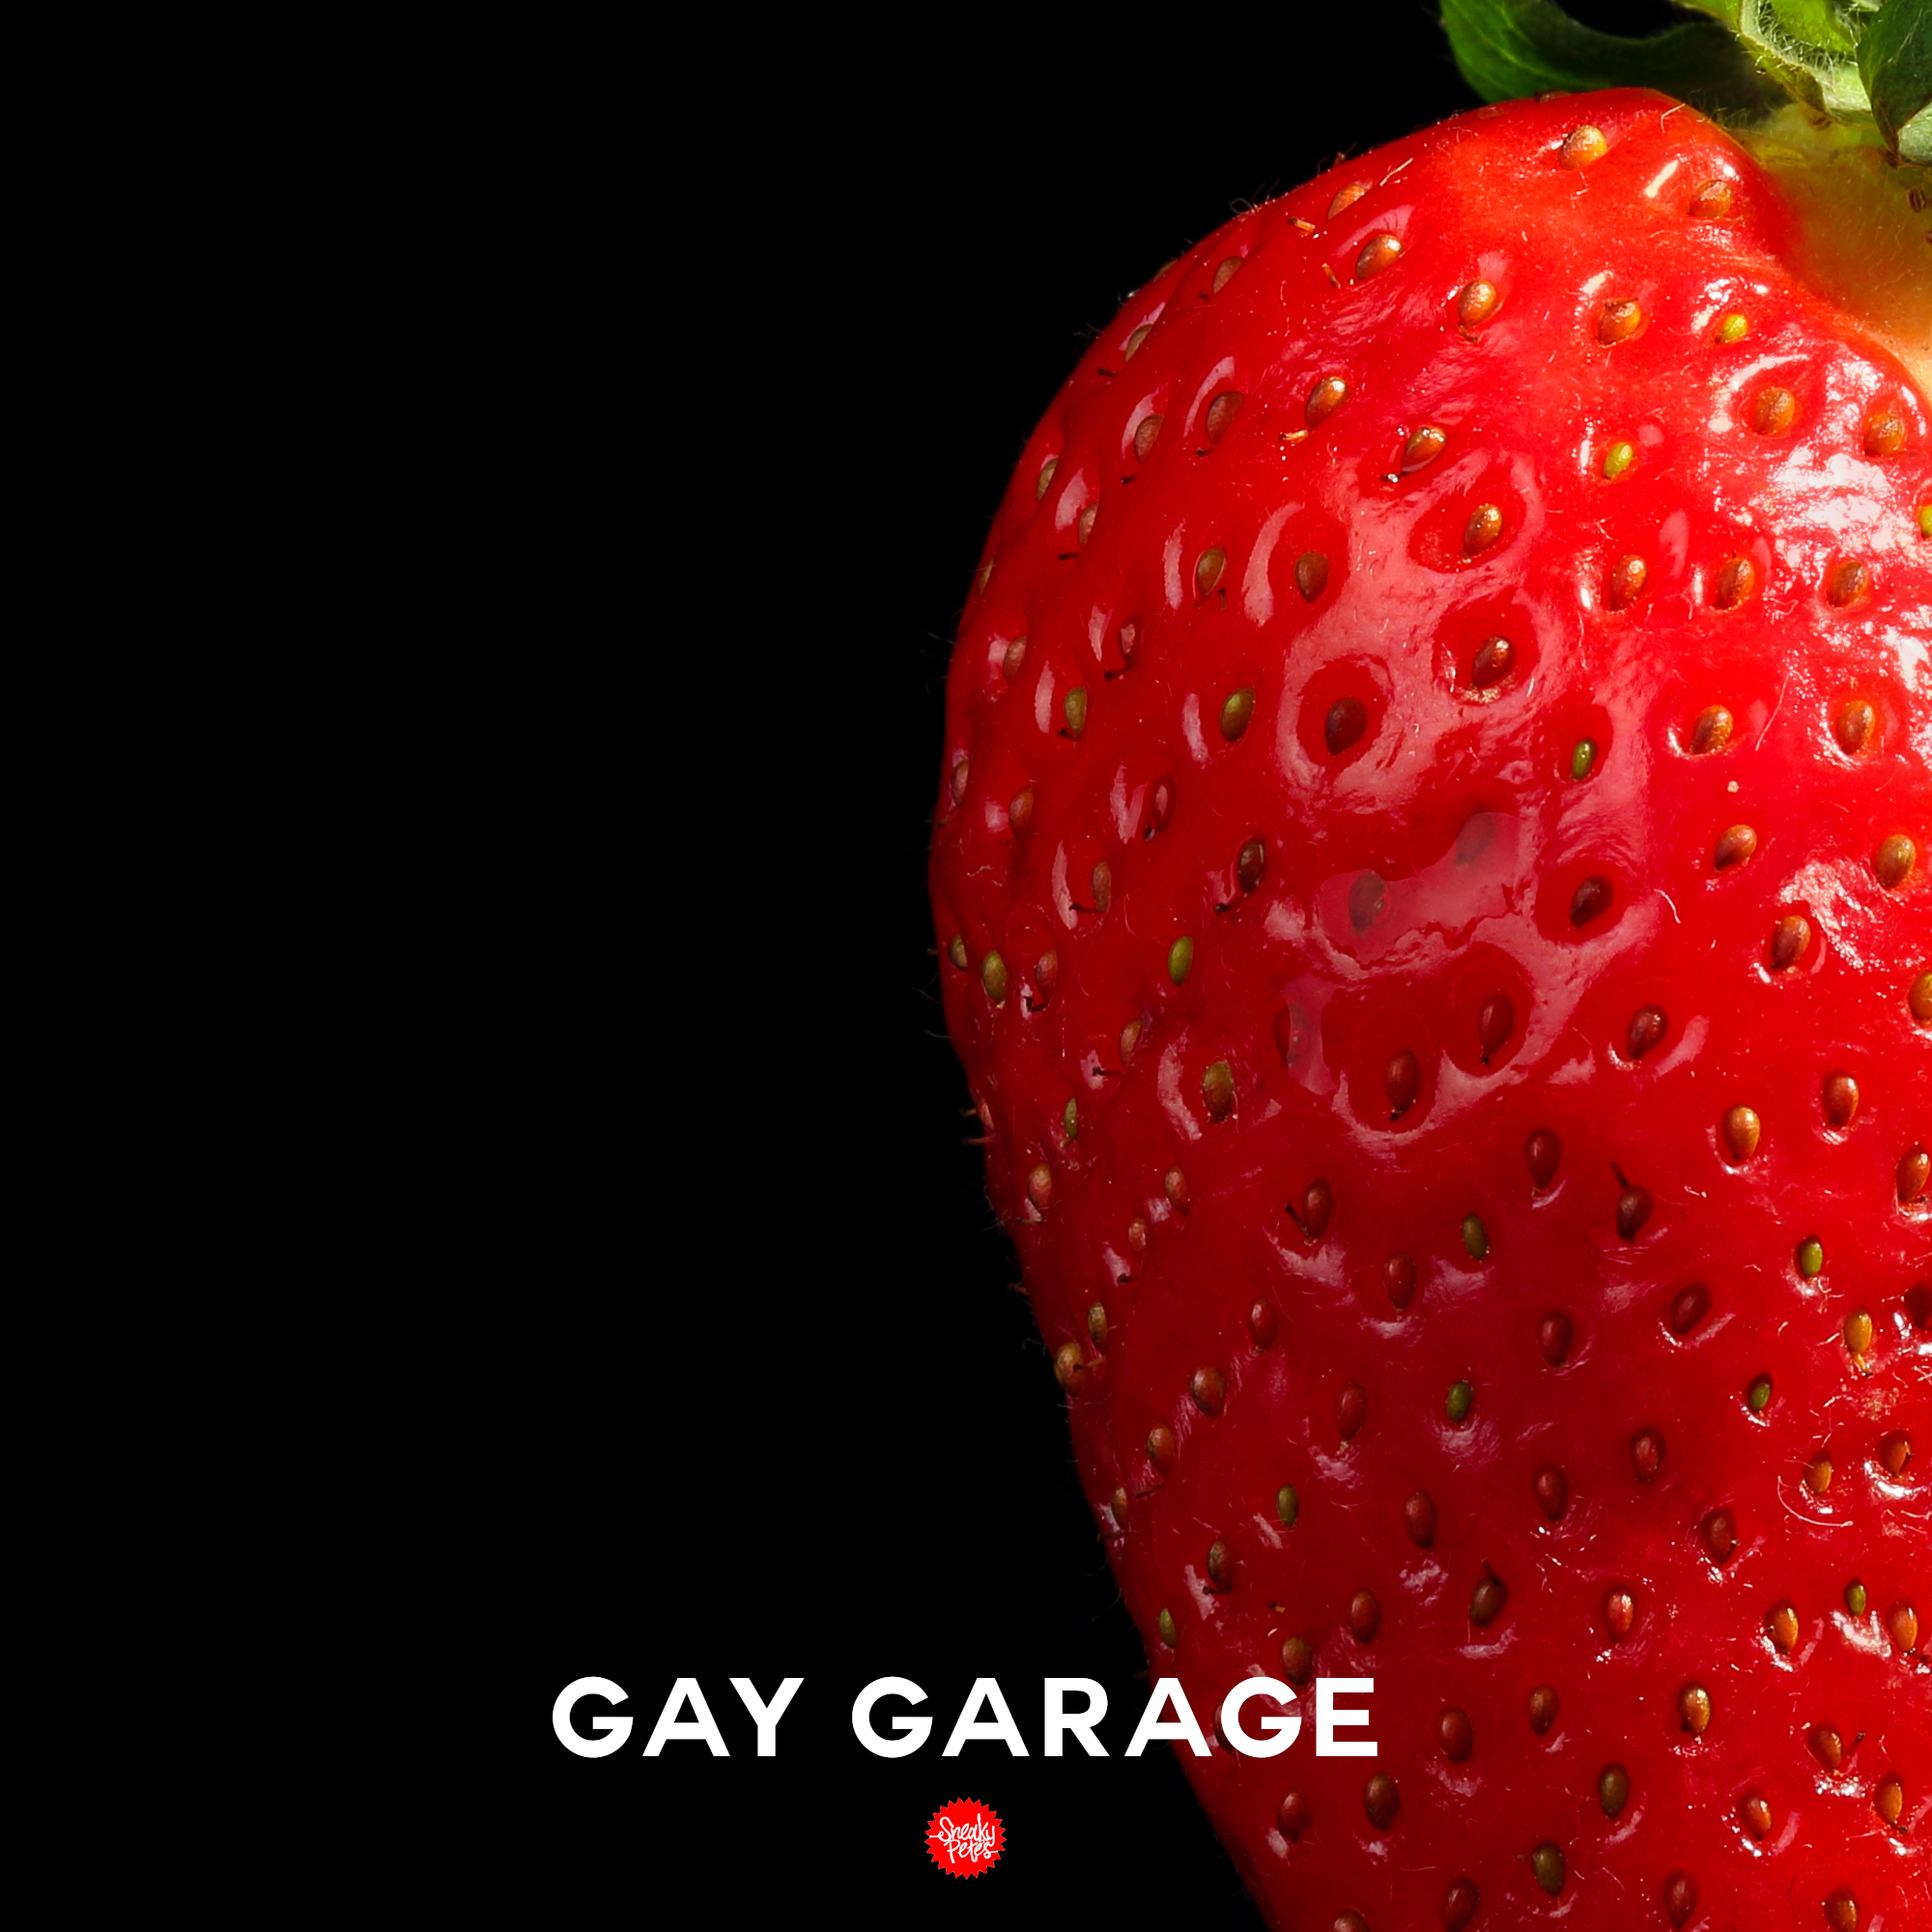 Headset's Gay Garage with Leonce - フライヤー裏